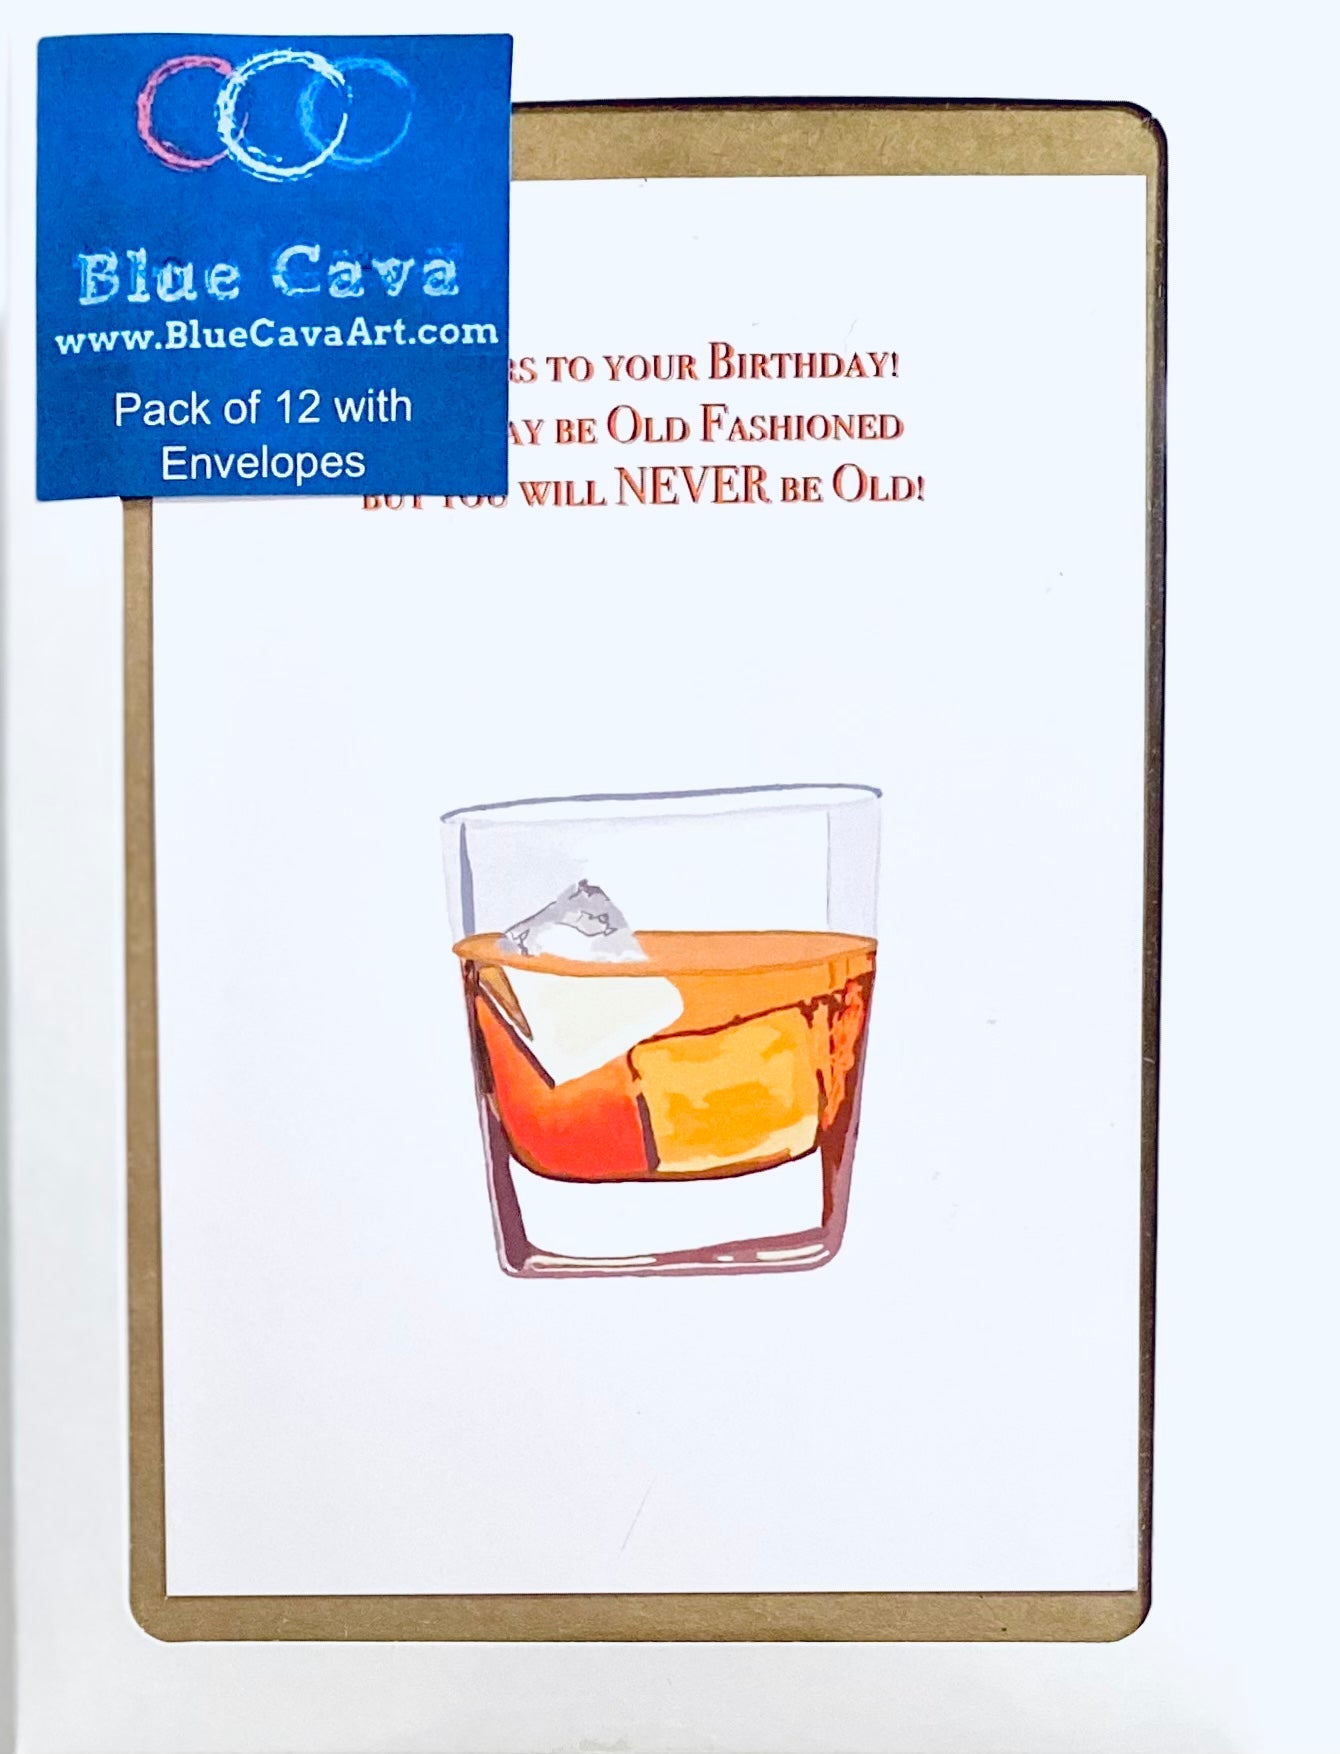 Old Fashioned Greeting cards (two colors available) - Blue Cava